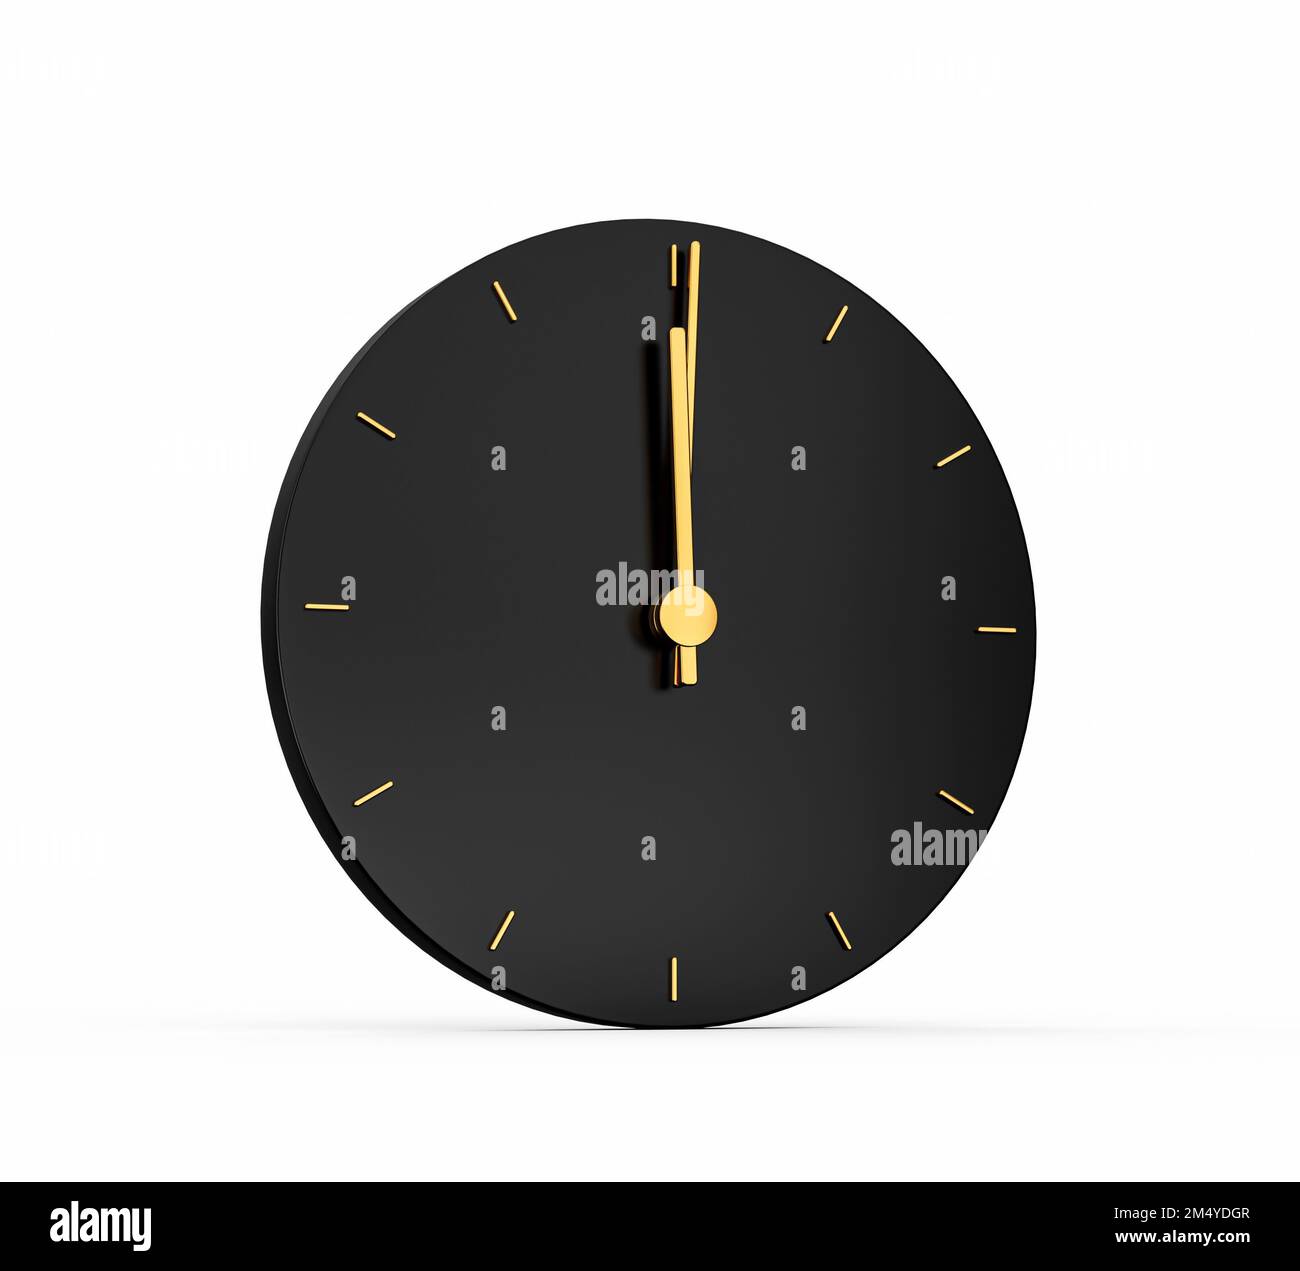 A 3D illustration of a black clock showing 12 o'clock on a white background Stock Photo